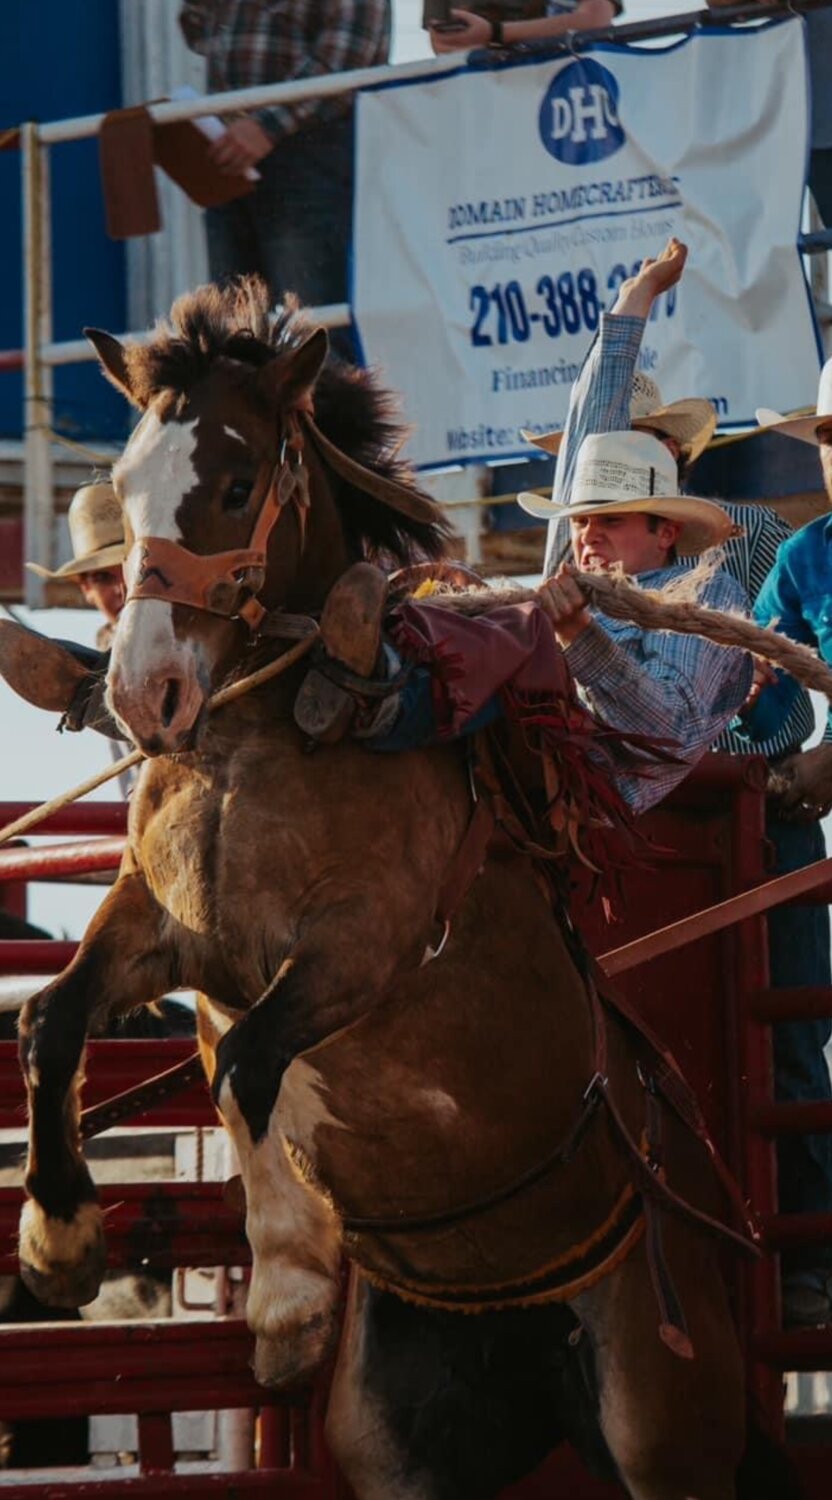 Sutton Albert on his horse for the saddle bronc competition. Albert enters the Texas High School Rodeo Finals as the Region 6 winner for the saddle bronc competition.